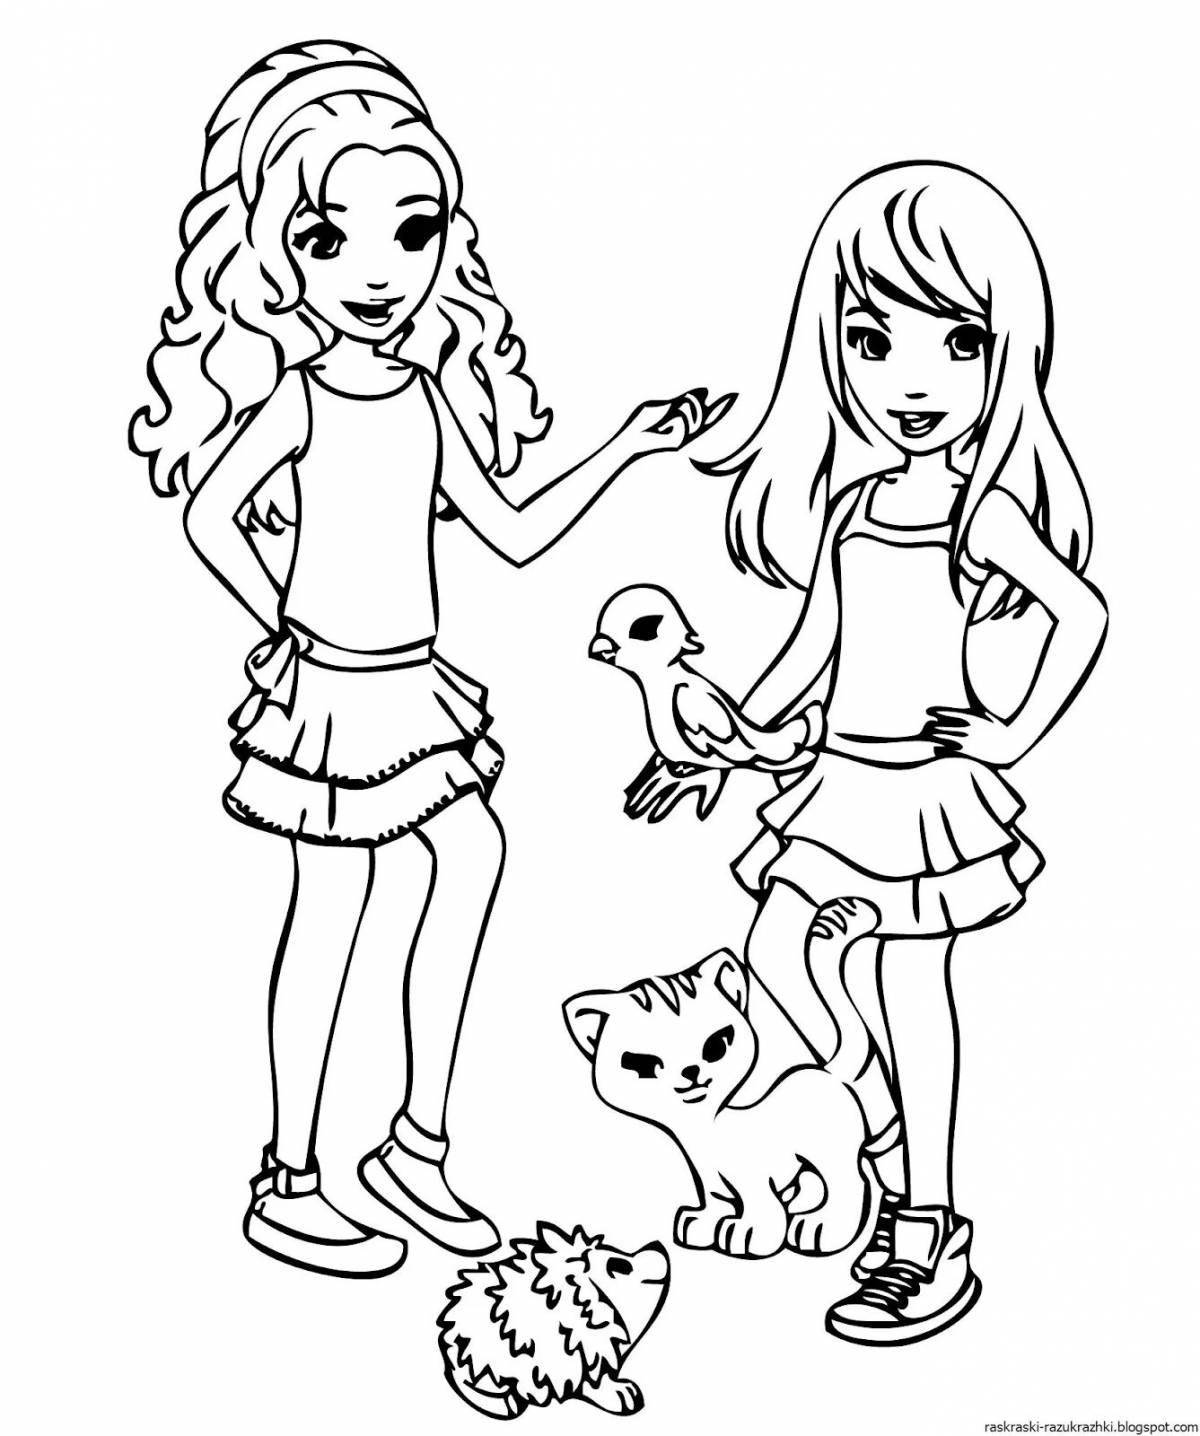 Colorful lego friends coloring page